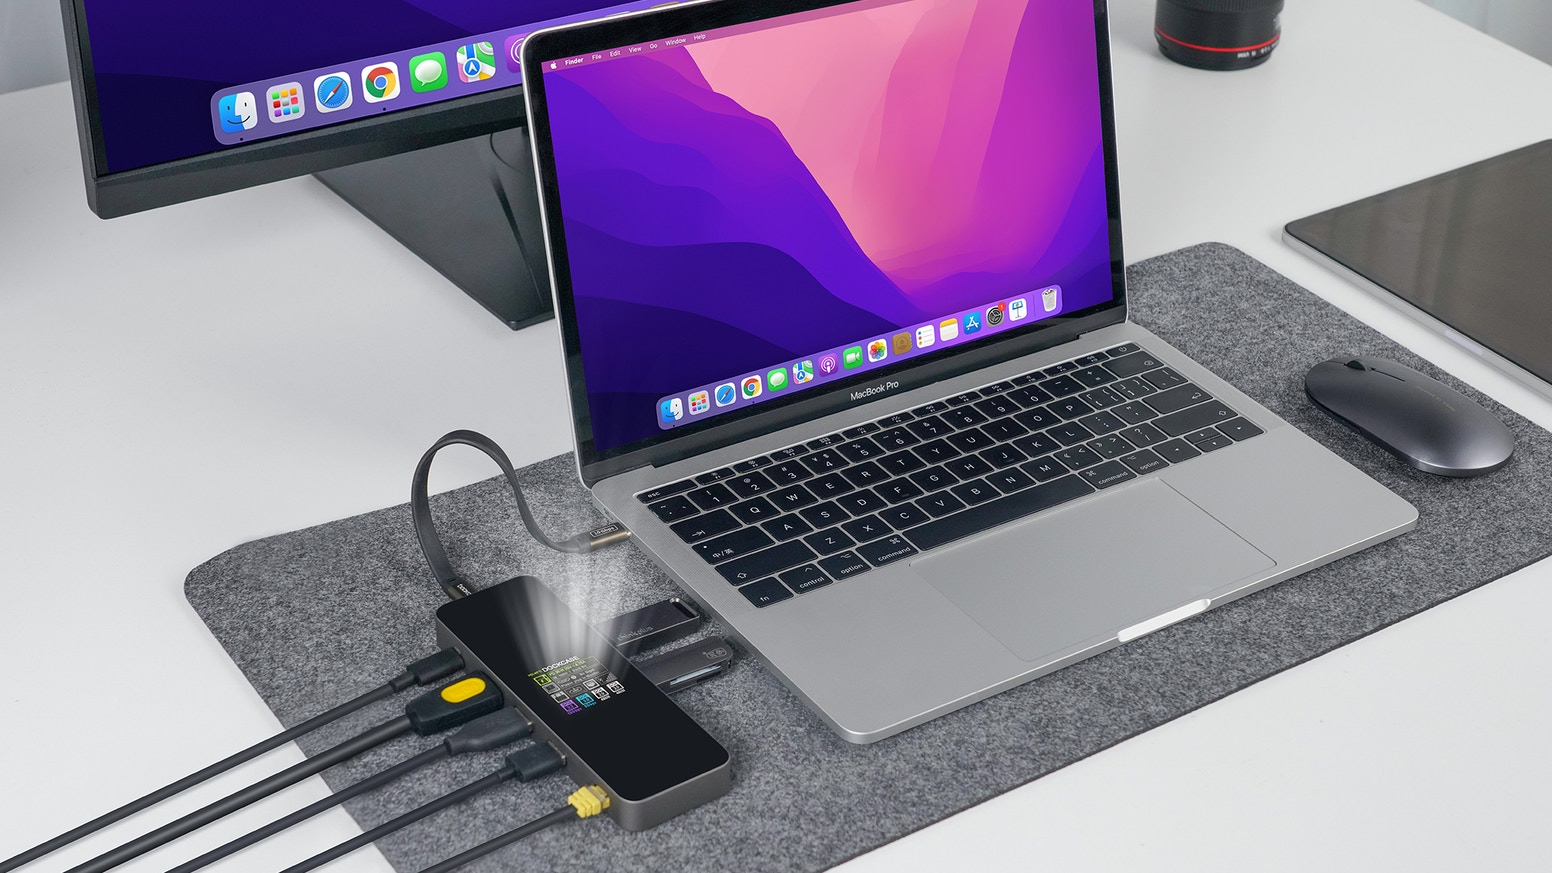 Review: DockCase's new high-speed USB-C smart hub for MacBook, now on  Kickstarter - 9to5Mac